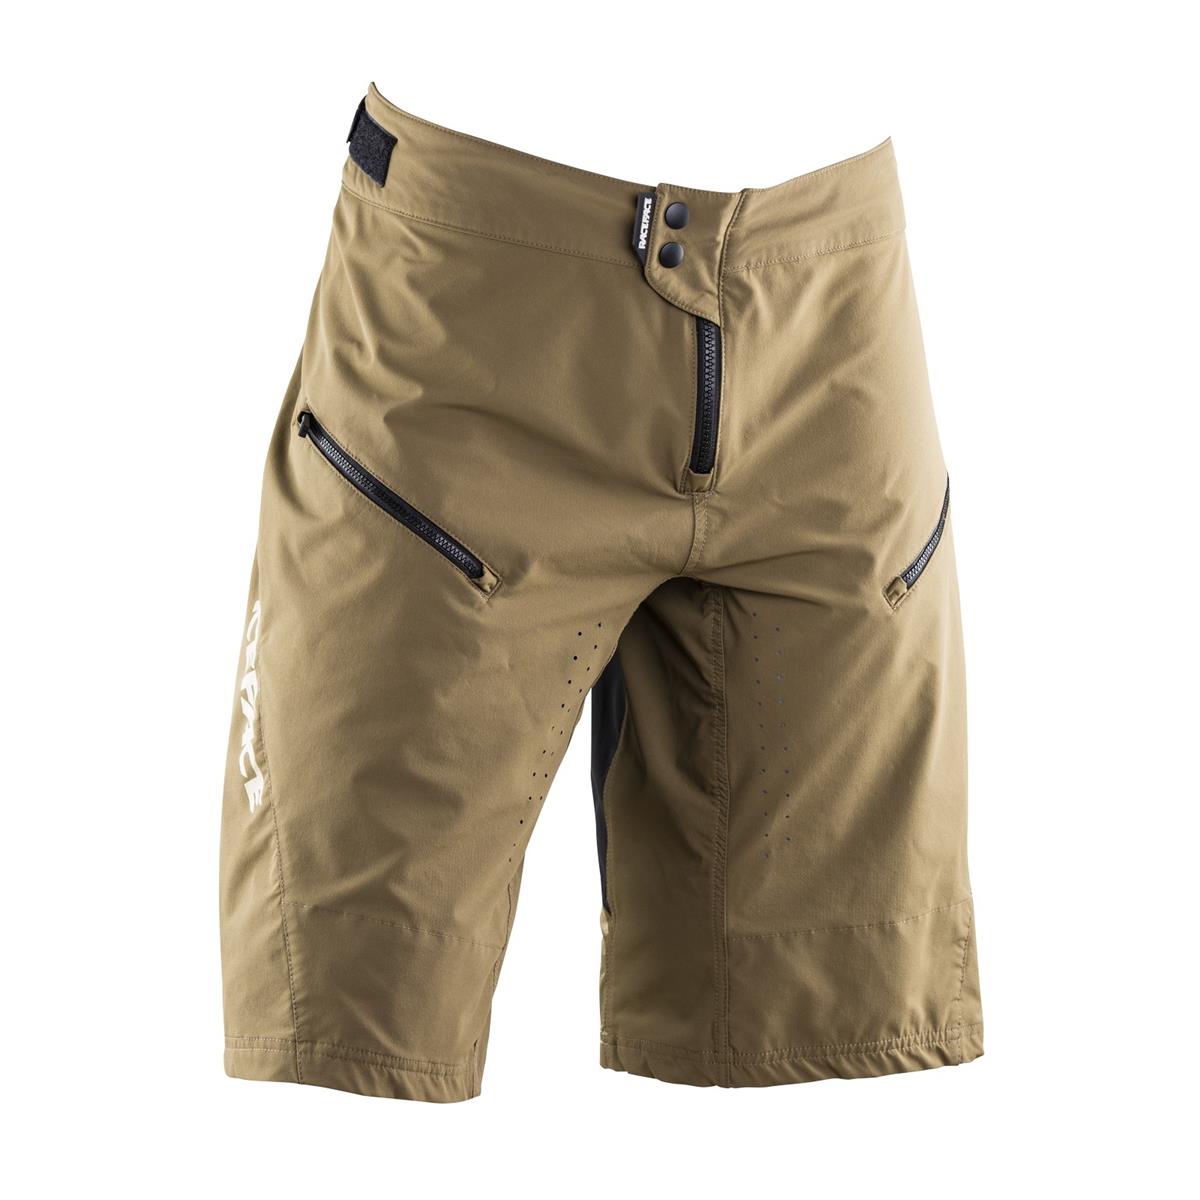 Race Face Trail Short Indy Olive